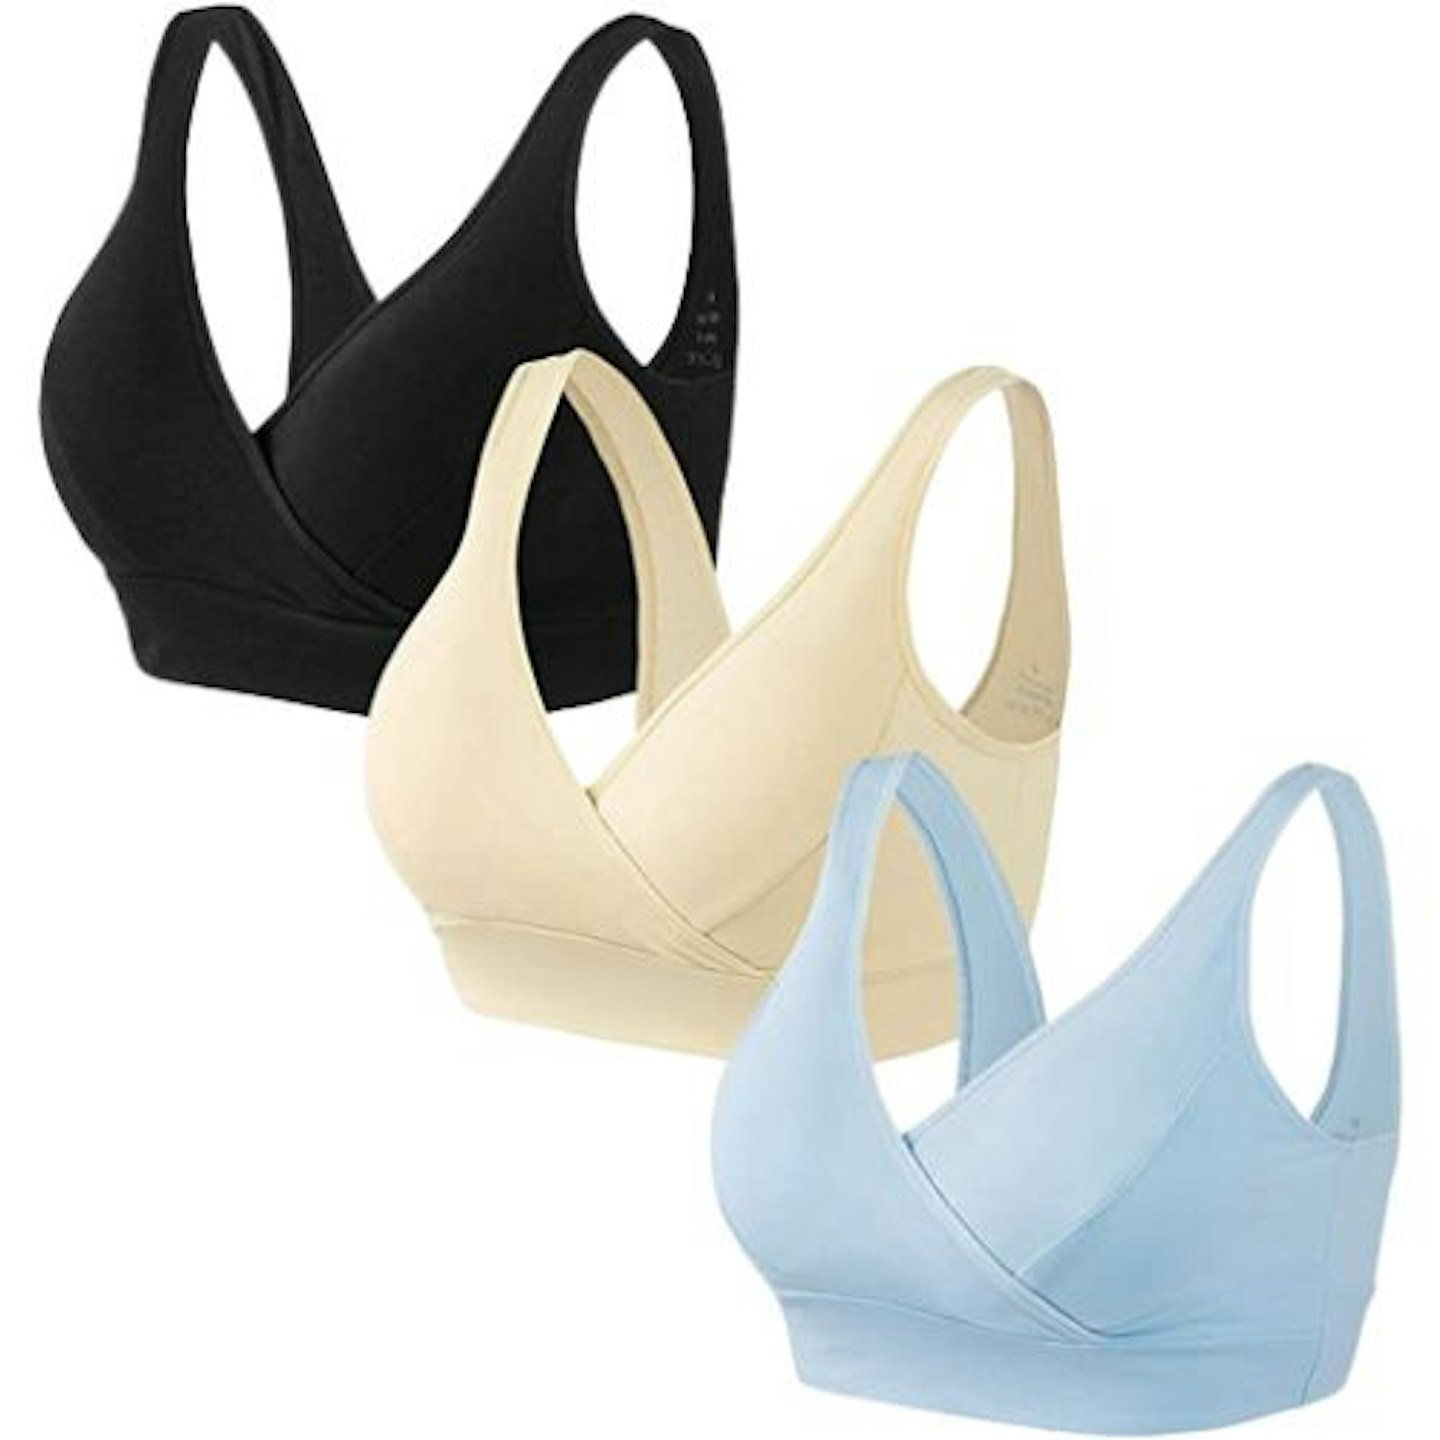 The Best Maternity Sleep Bras 2023 | Reviews | Mother & Baby